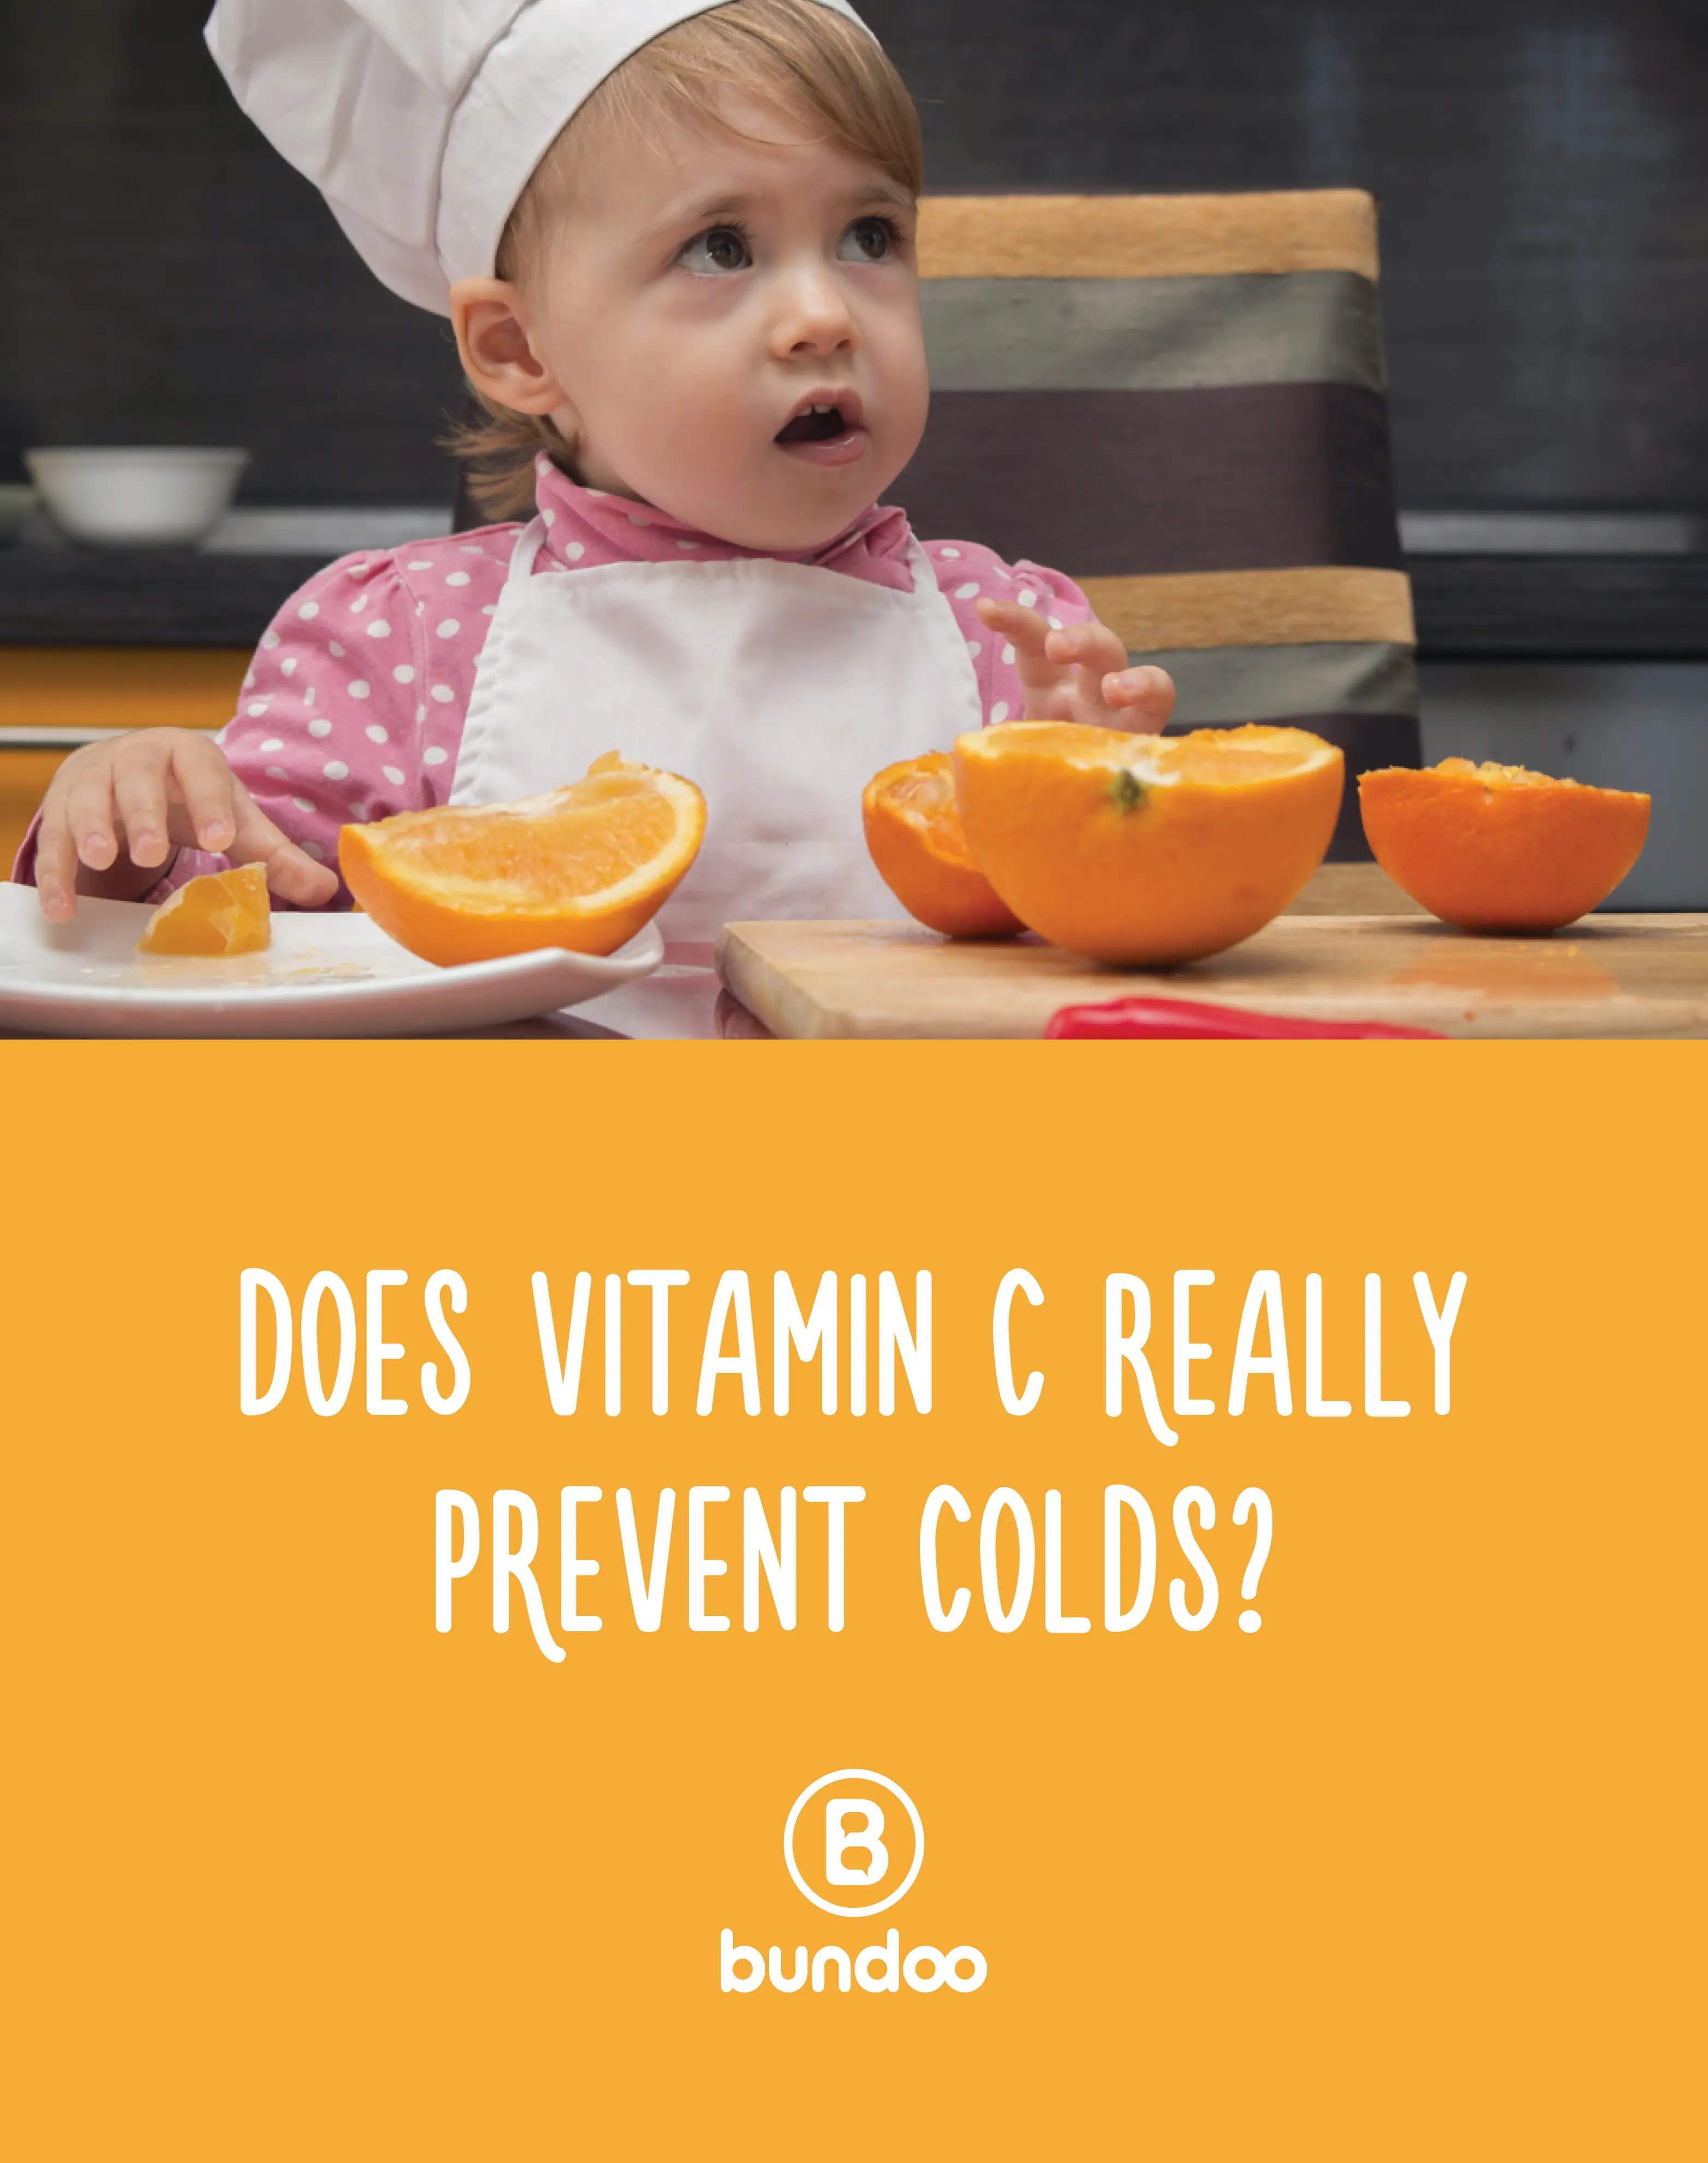 Does Vitamin C Help With Colds